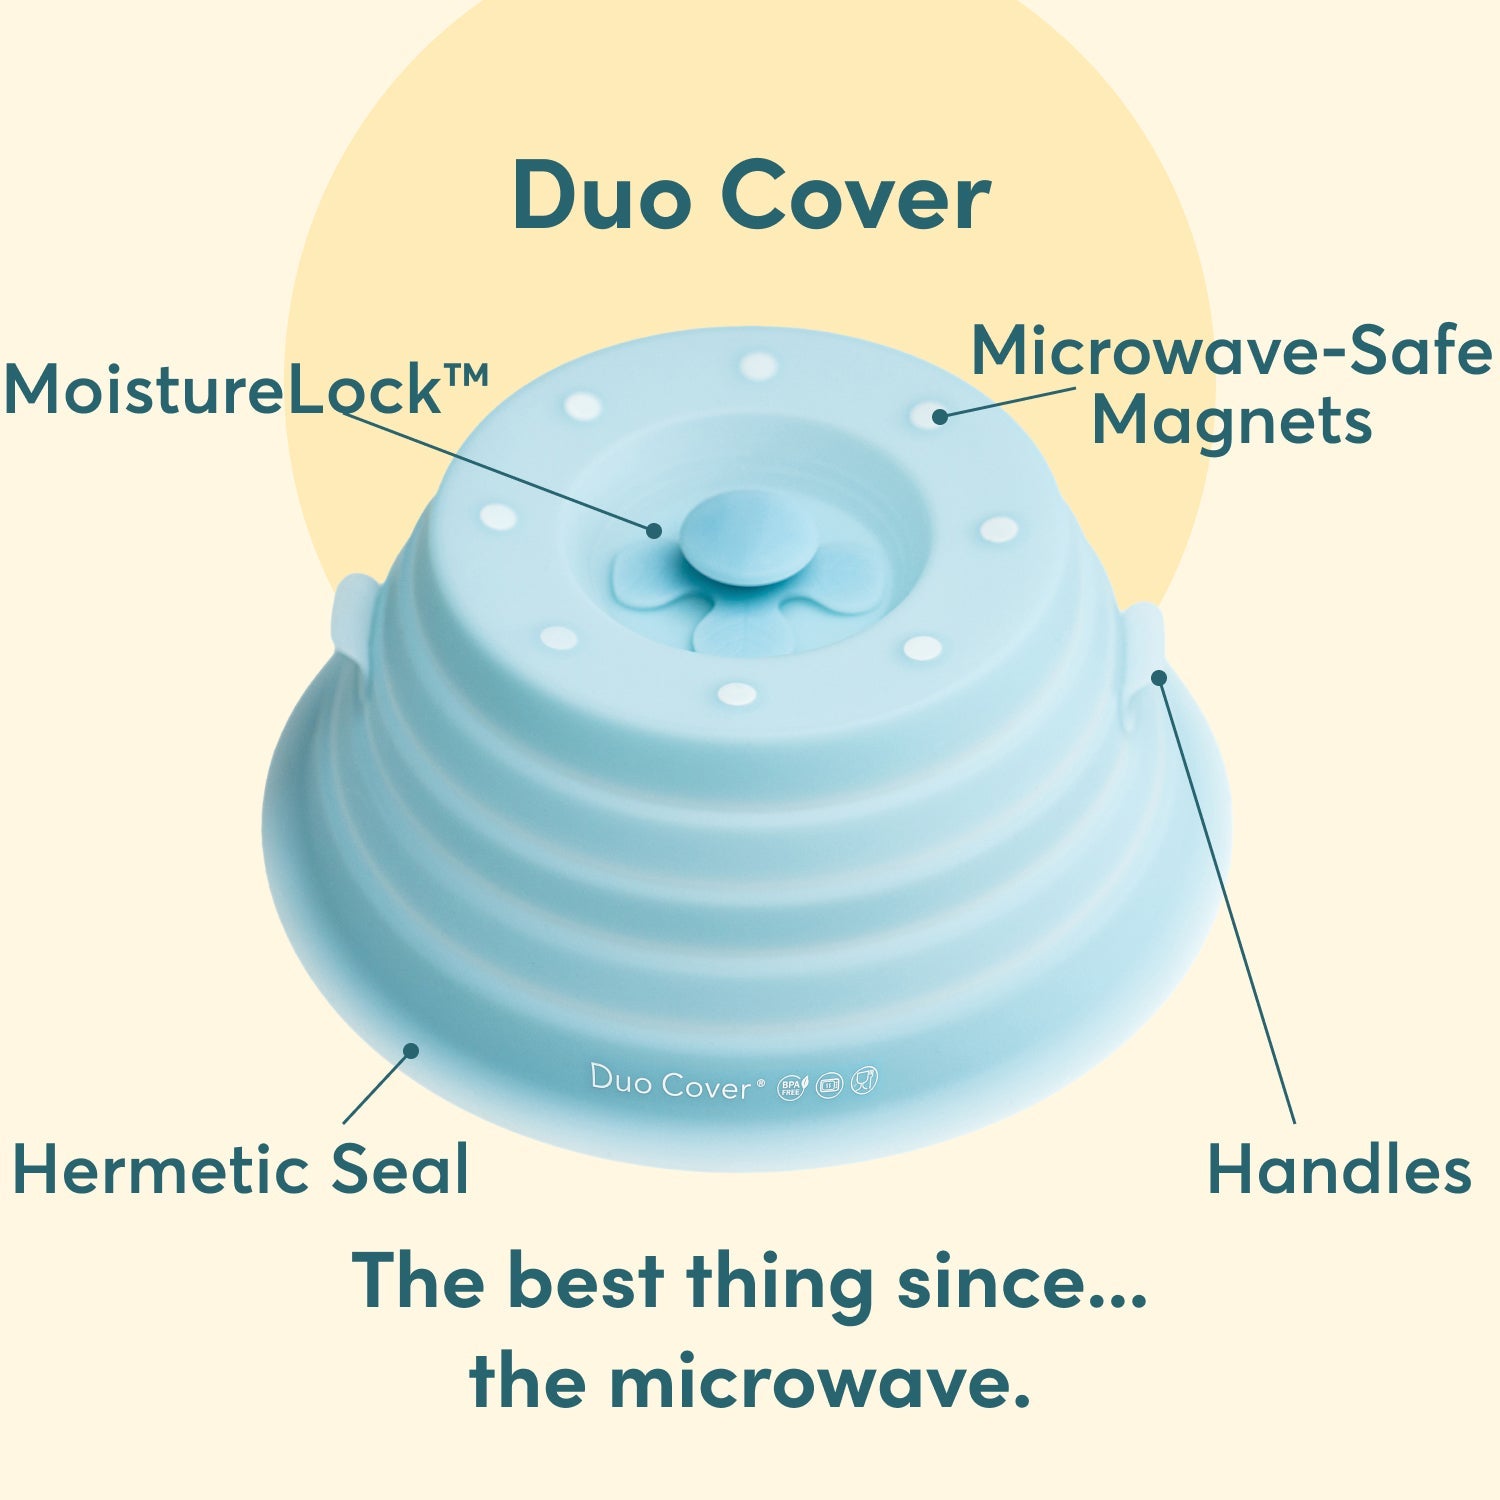 Duo Cover - The Microwave Food Cover